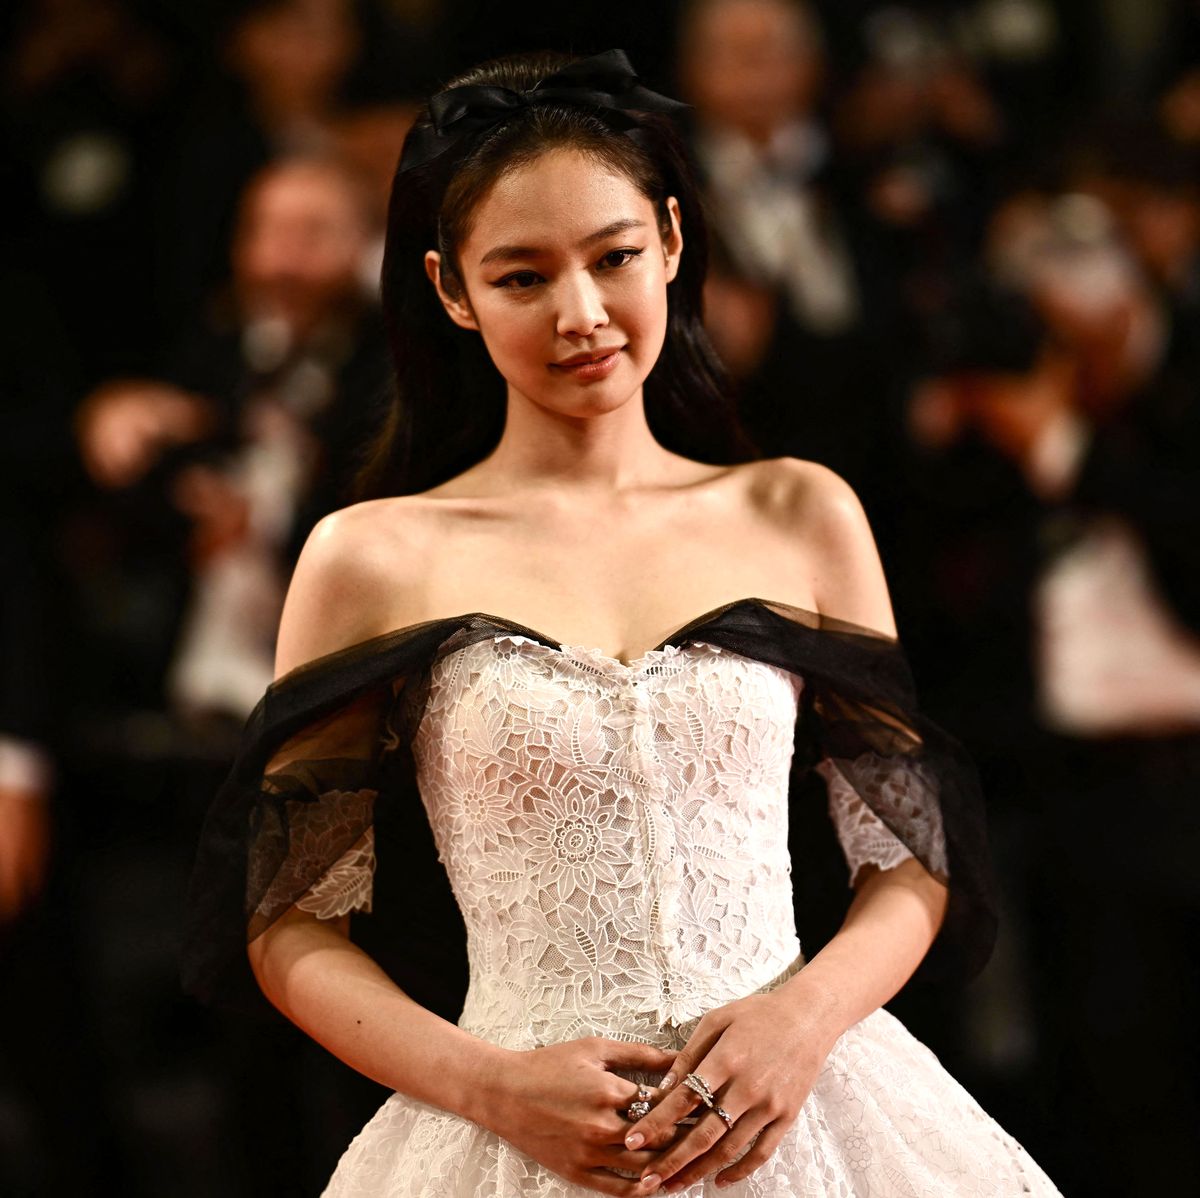 Blackpink's Jennie Kim Stuns In Chanel Gown For 'The Idol' Premiere At  Cannes Film Festival